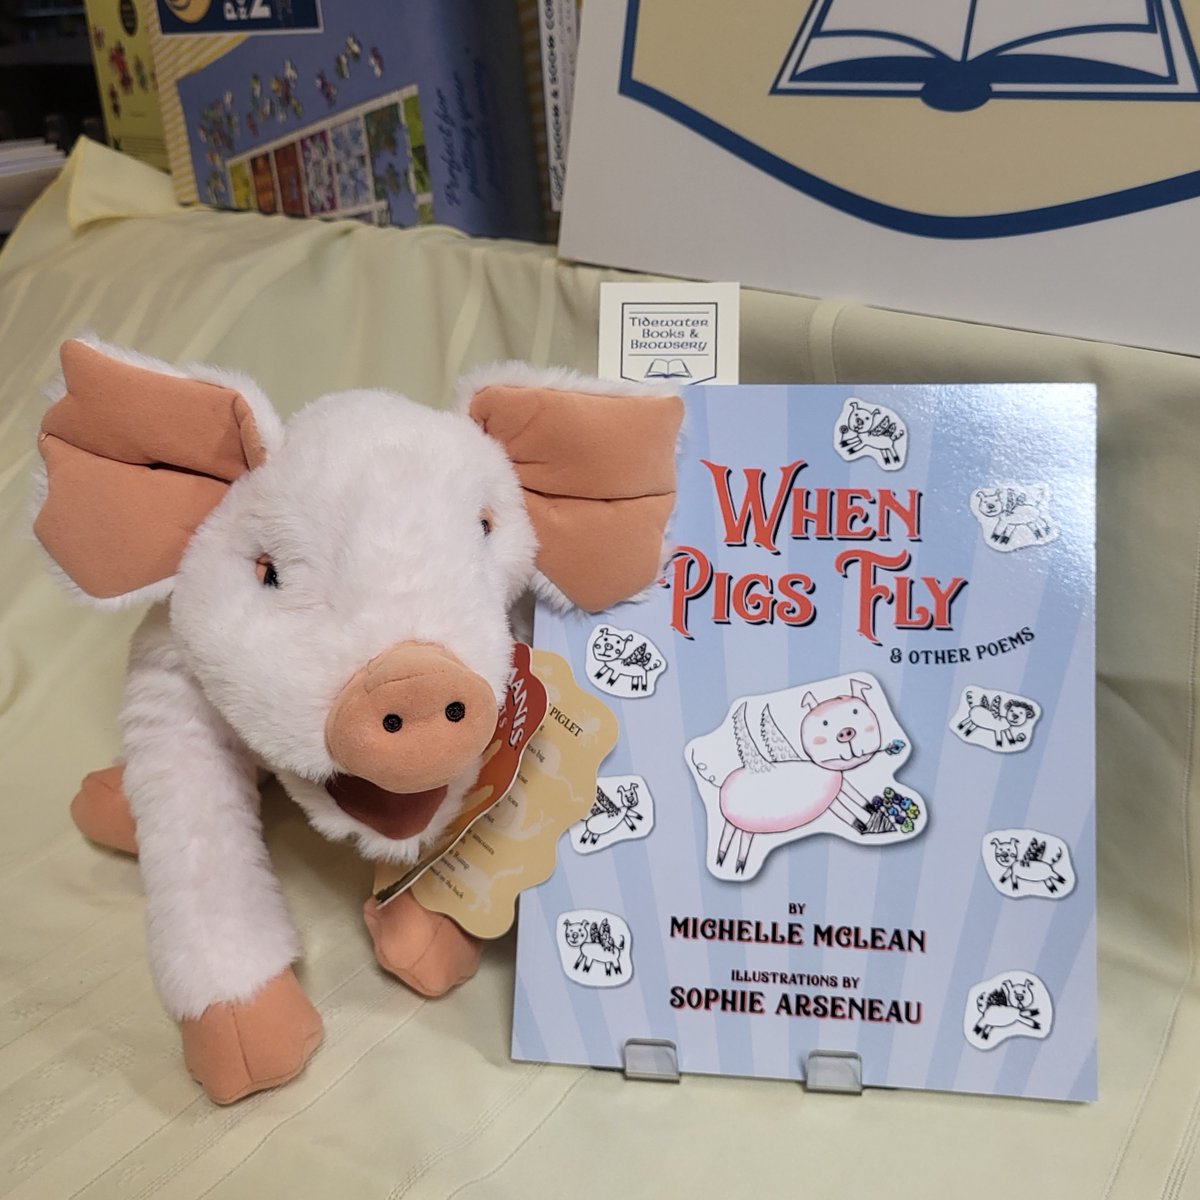 Today's #MaritimeMonday Featured #Book in-store is 'When Pigs Fly' by Michelle McLean & Sophie Arseneau 💕🇨🇦📚🐖🪽

Visit us in person or online at tidewaterbooks.ca! 💕🇨🇦📚

#ShopSmall #ShopLocal #ShopNB #ShopIndie #ReadIndie #ThinkIndie #BookLovers #IndieBookstores